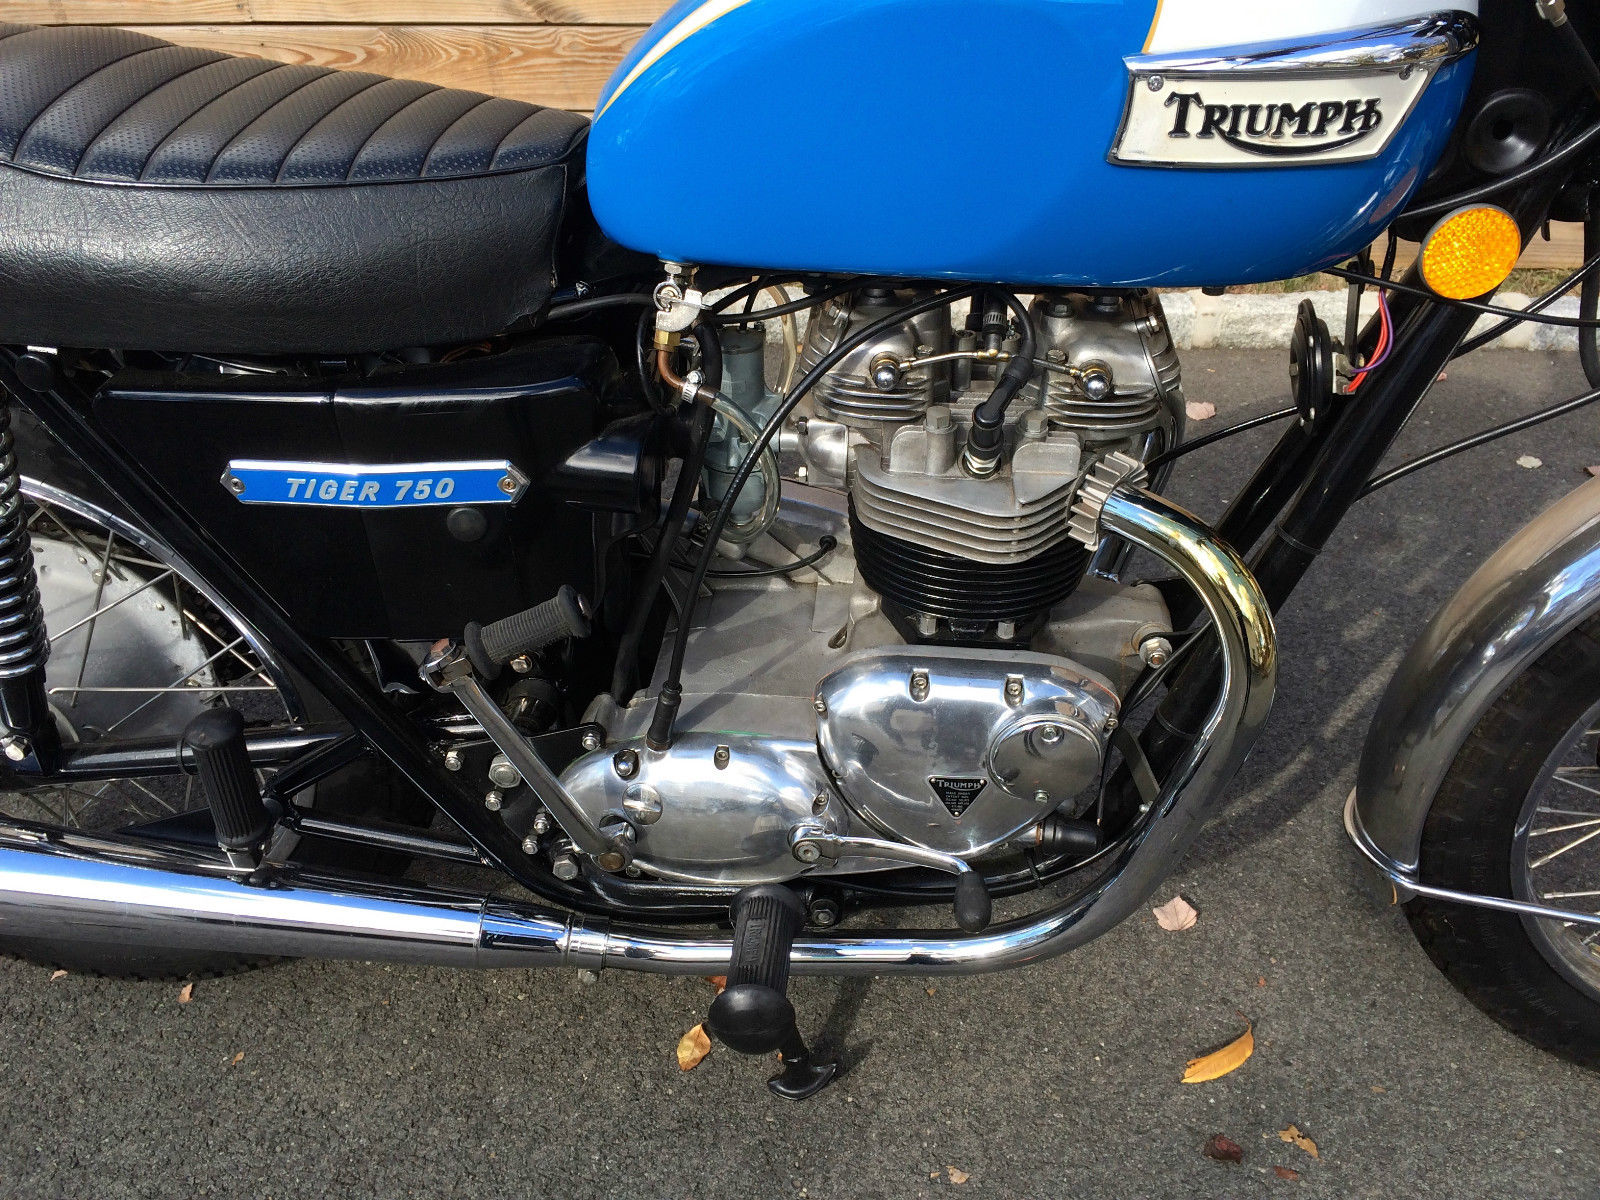 Triumph Tiger - 1973 - Motor and Transmission, Exhaust Pipes, Cylinder Head and Kick Start.